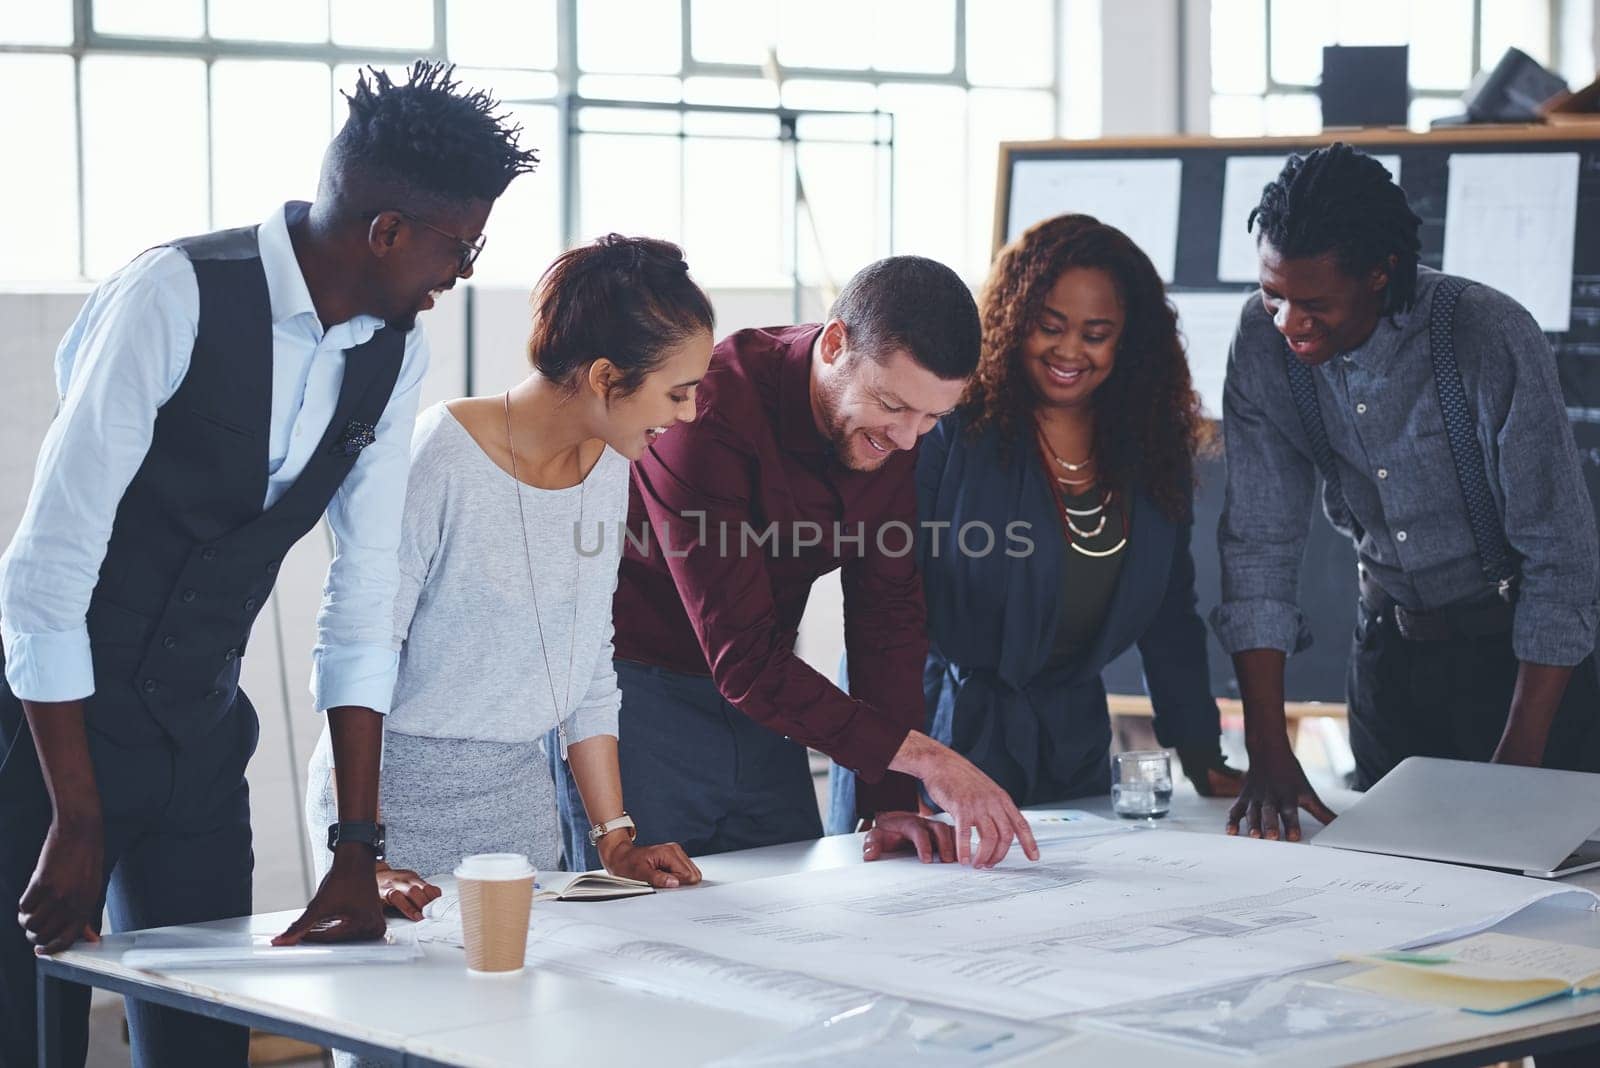 This is exactly what the client asked for. a team of professionals working on blueprints in an office